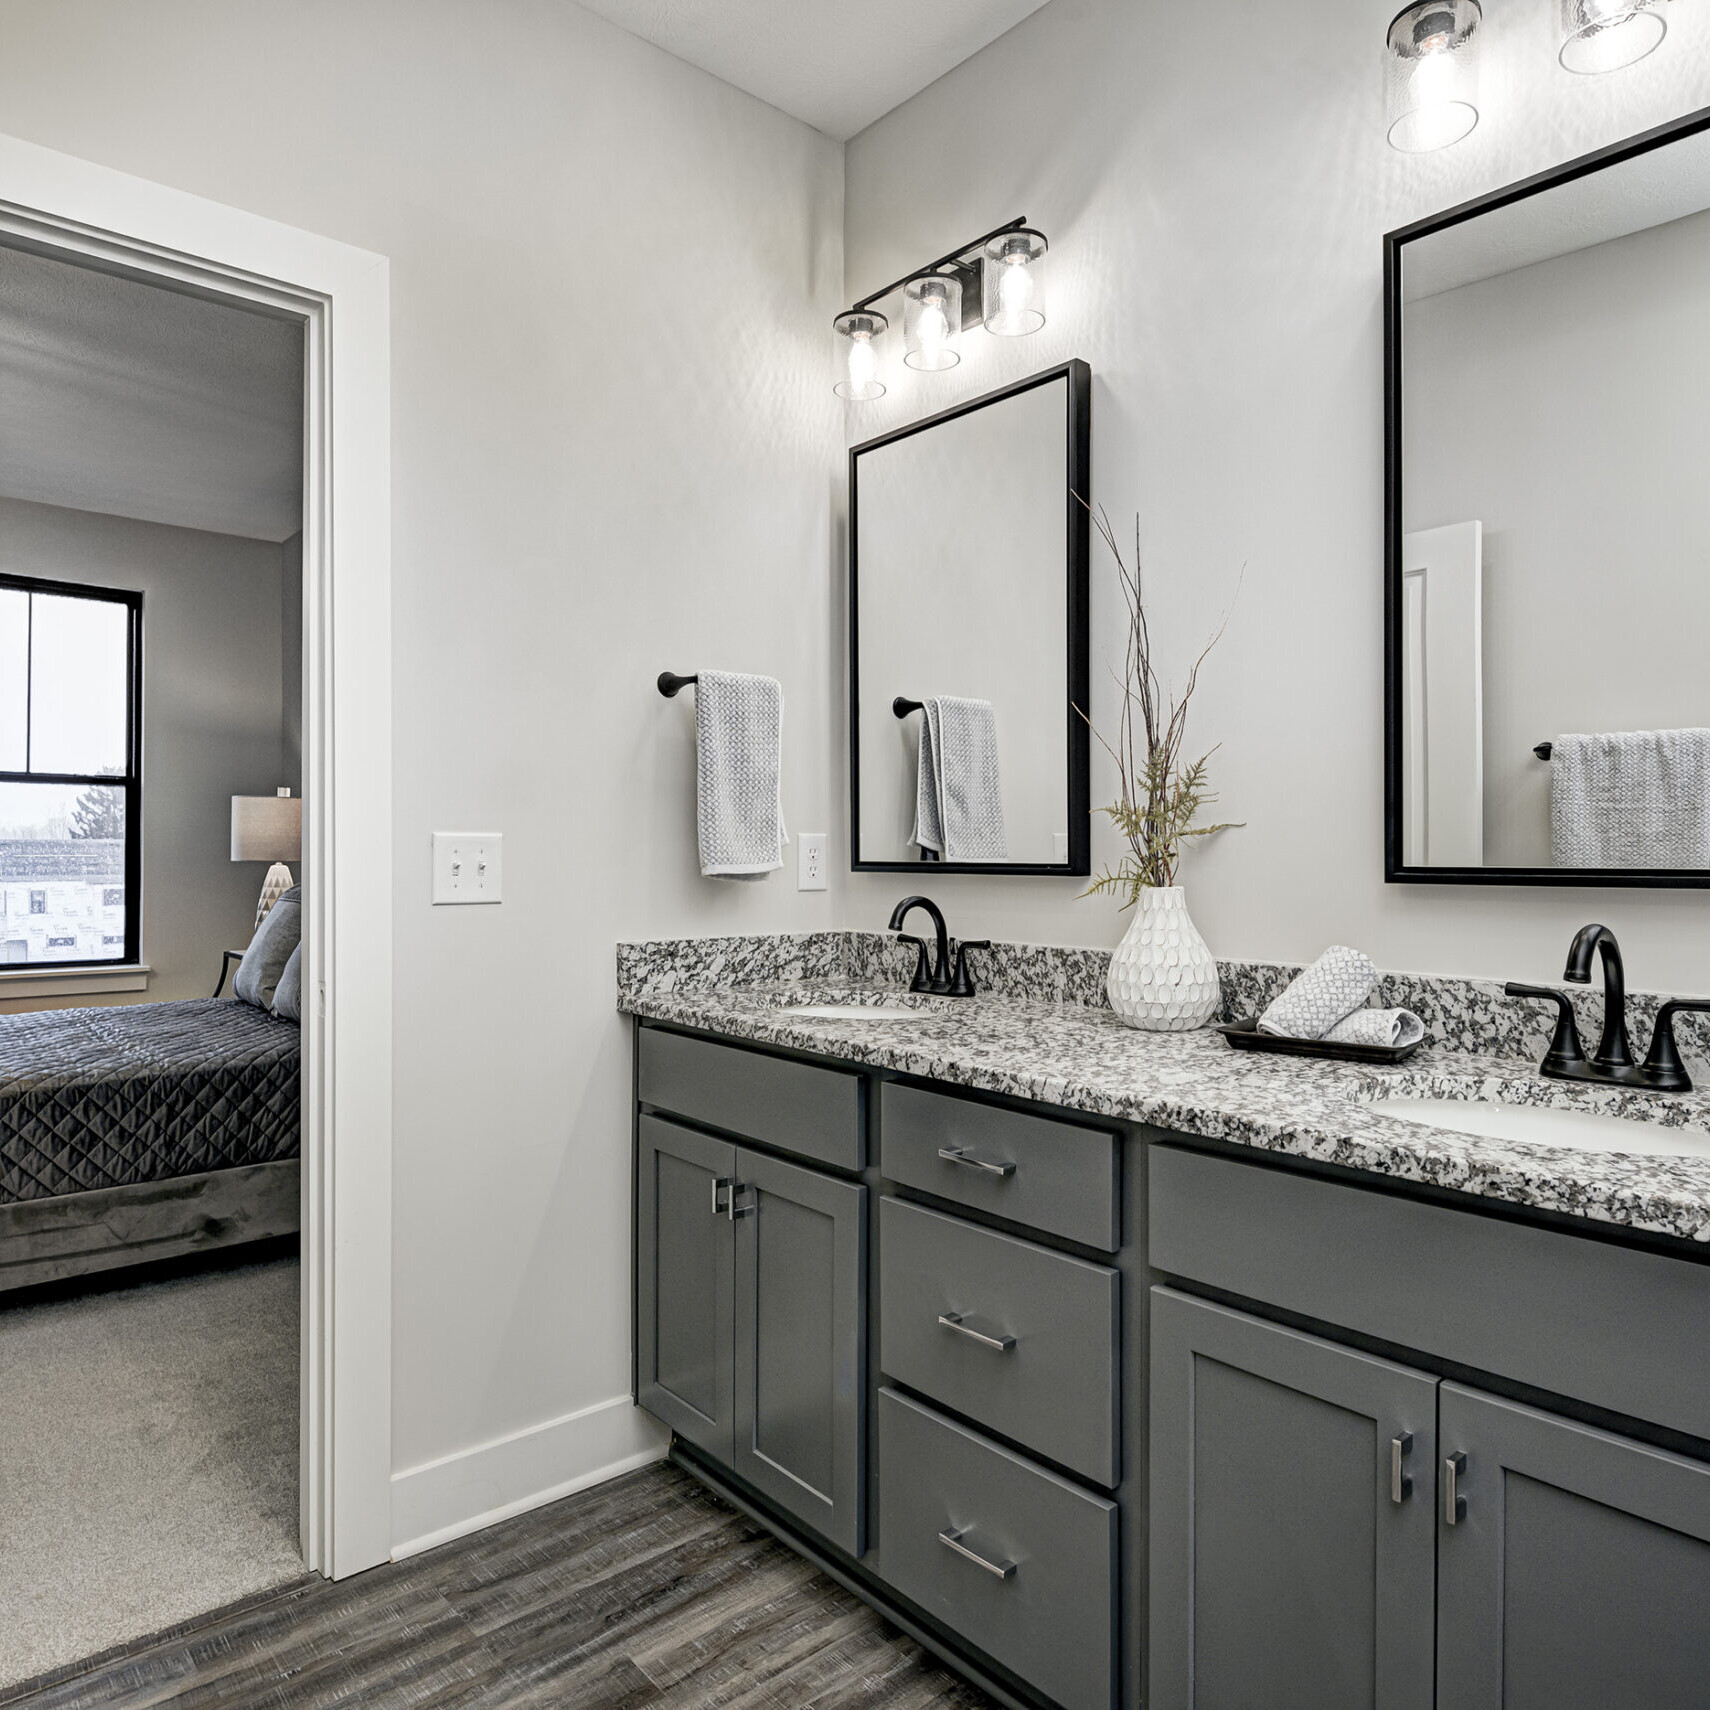 A bathroom with gray cabinets and granite counter tops, designed by a Custom Home Builder Carmel Indiana.